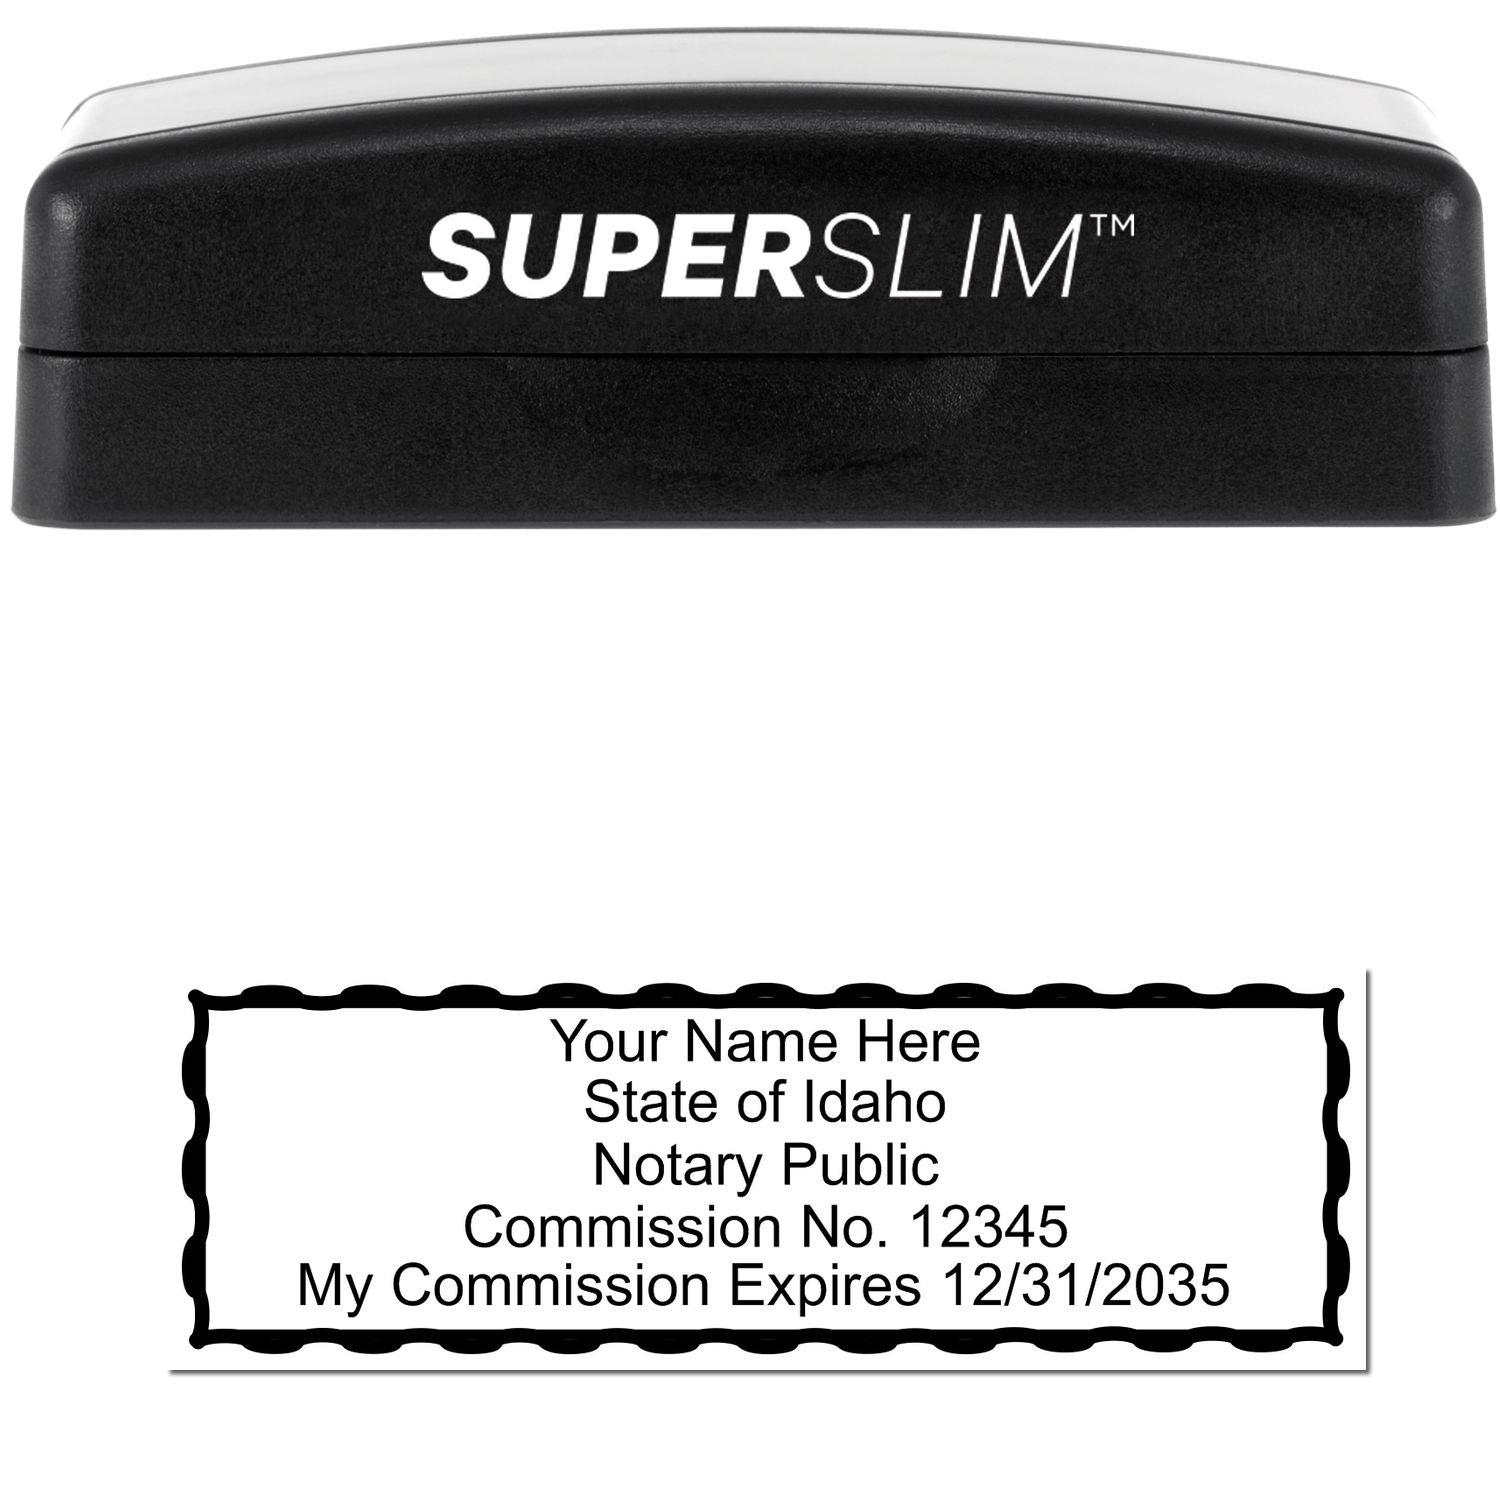 The main image for the Super Slim Idaho Notary Public Stamp depicting a sample of the imprint and electronic files